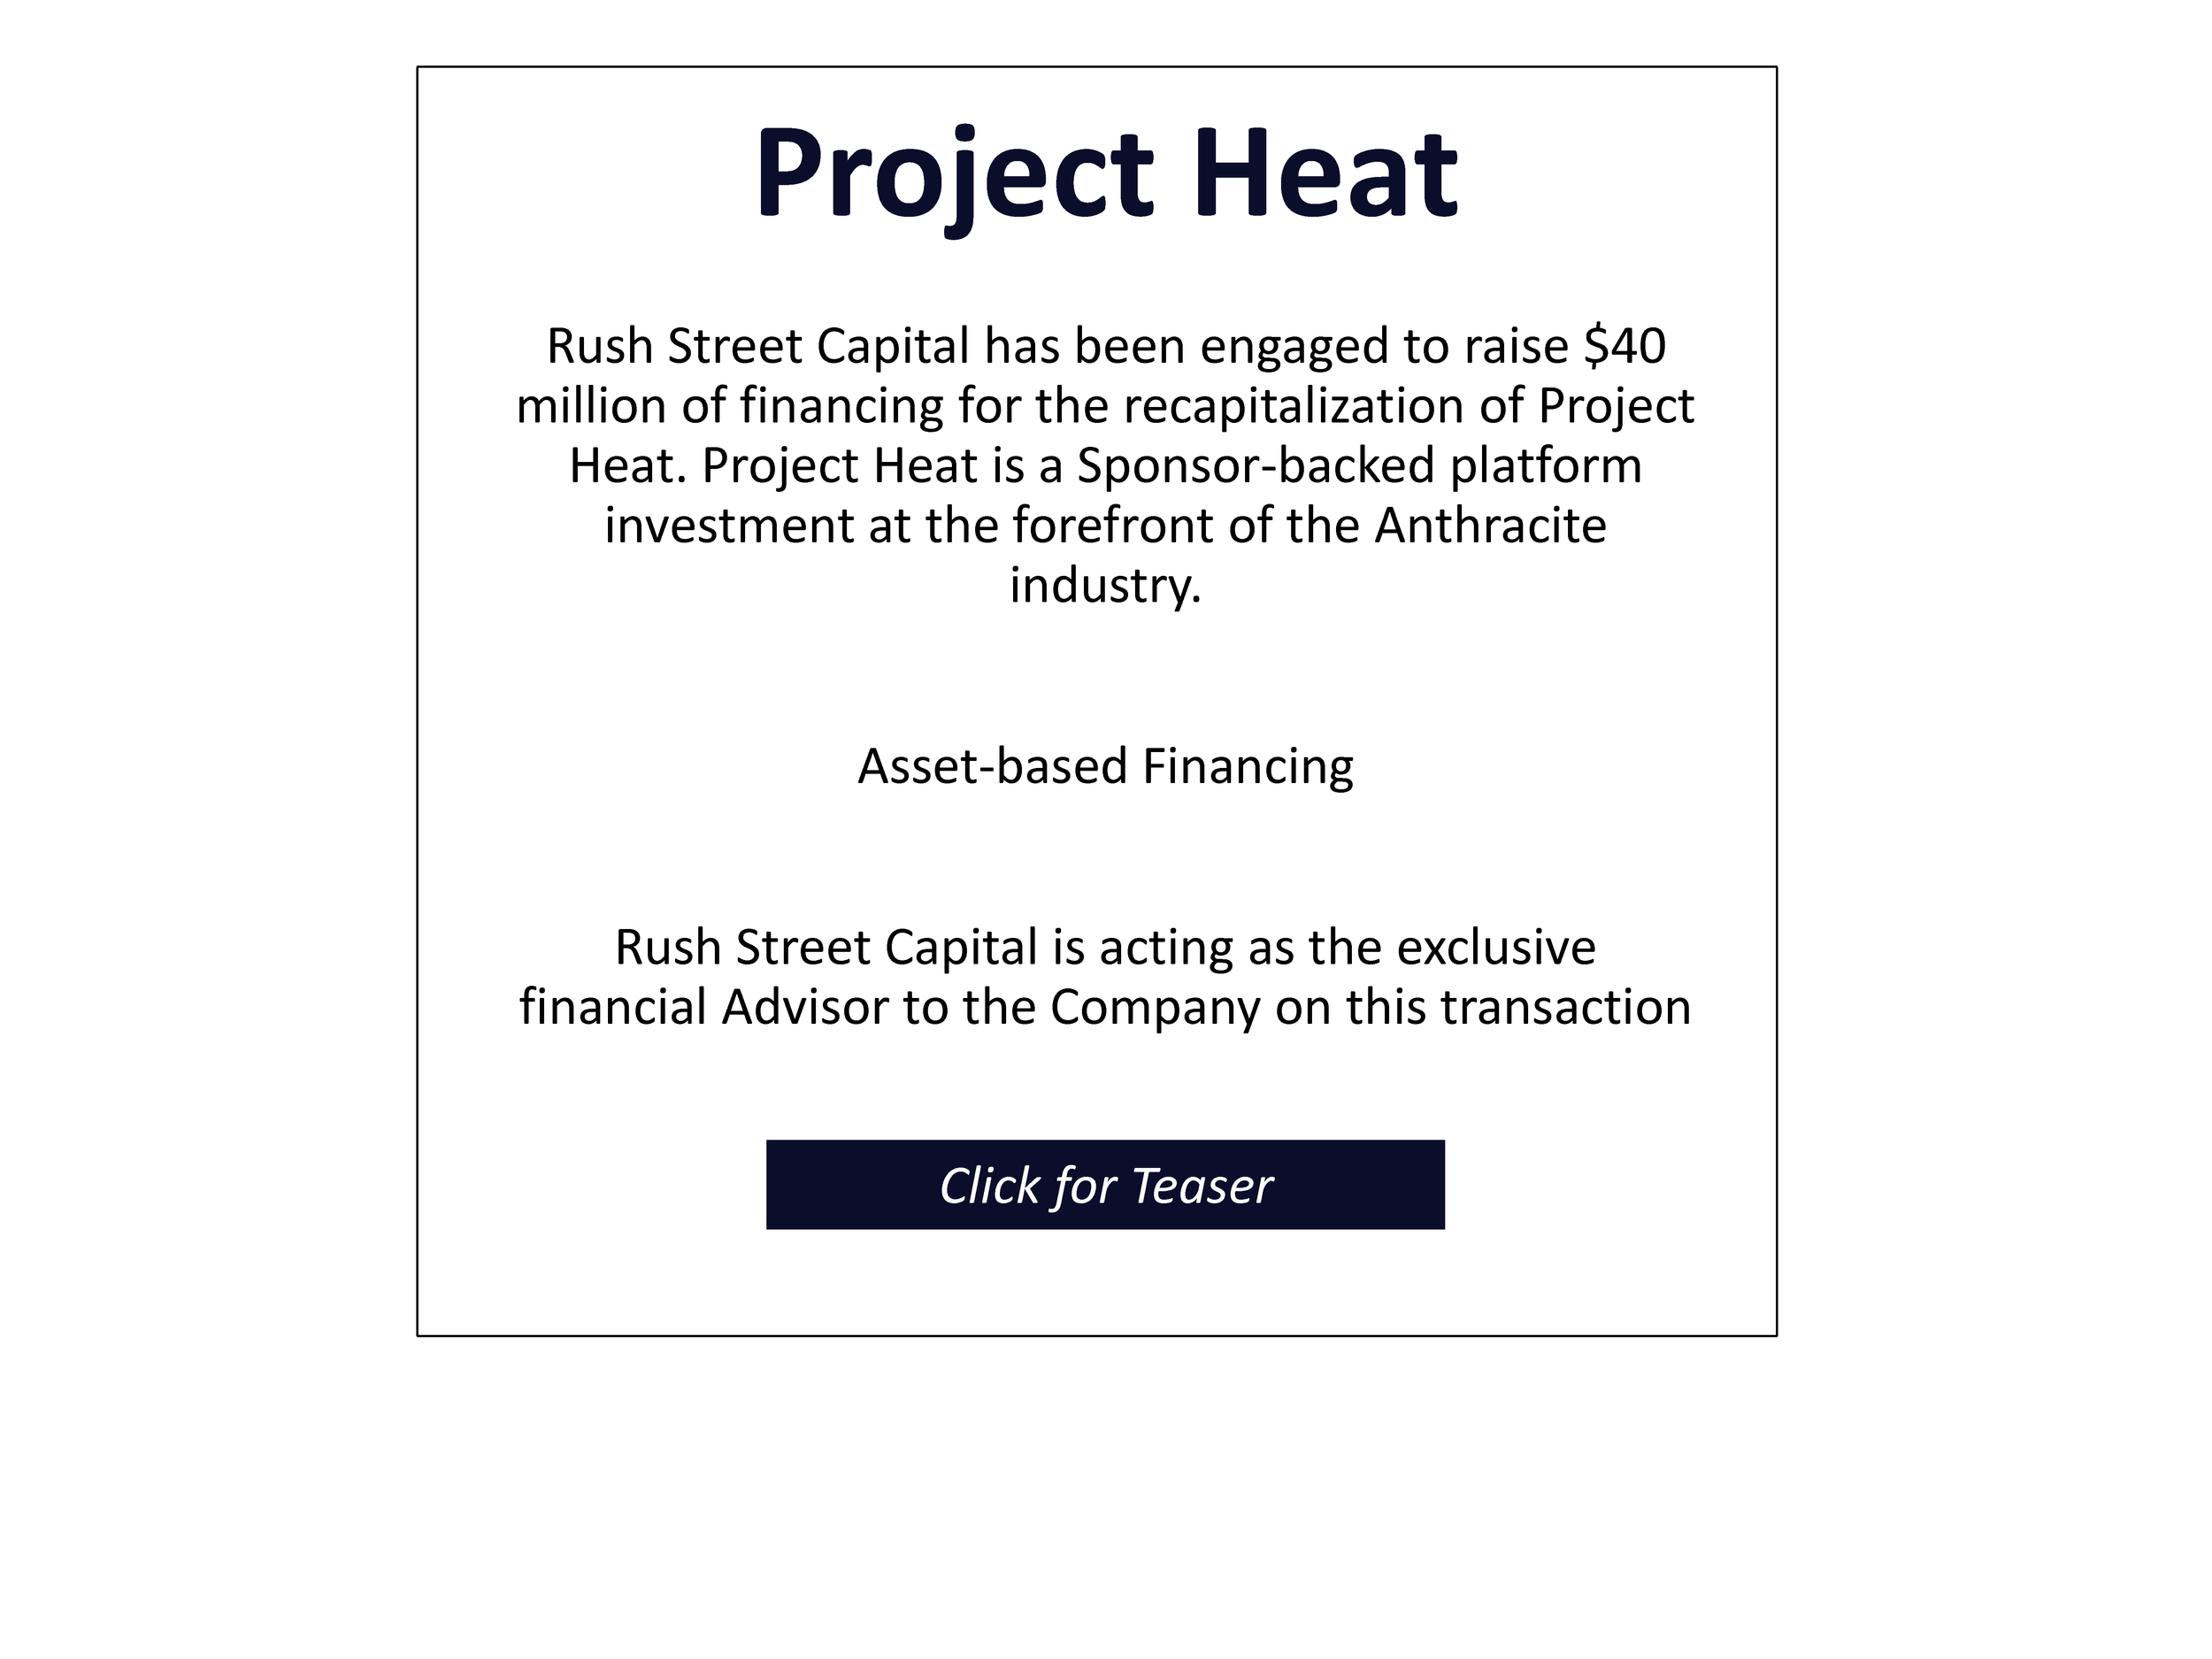 Project Heat - Website Teaser [Autosaved].png